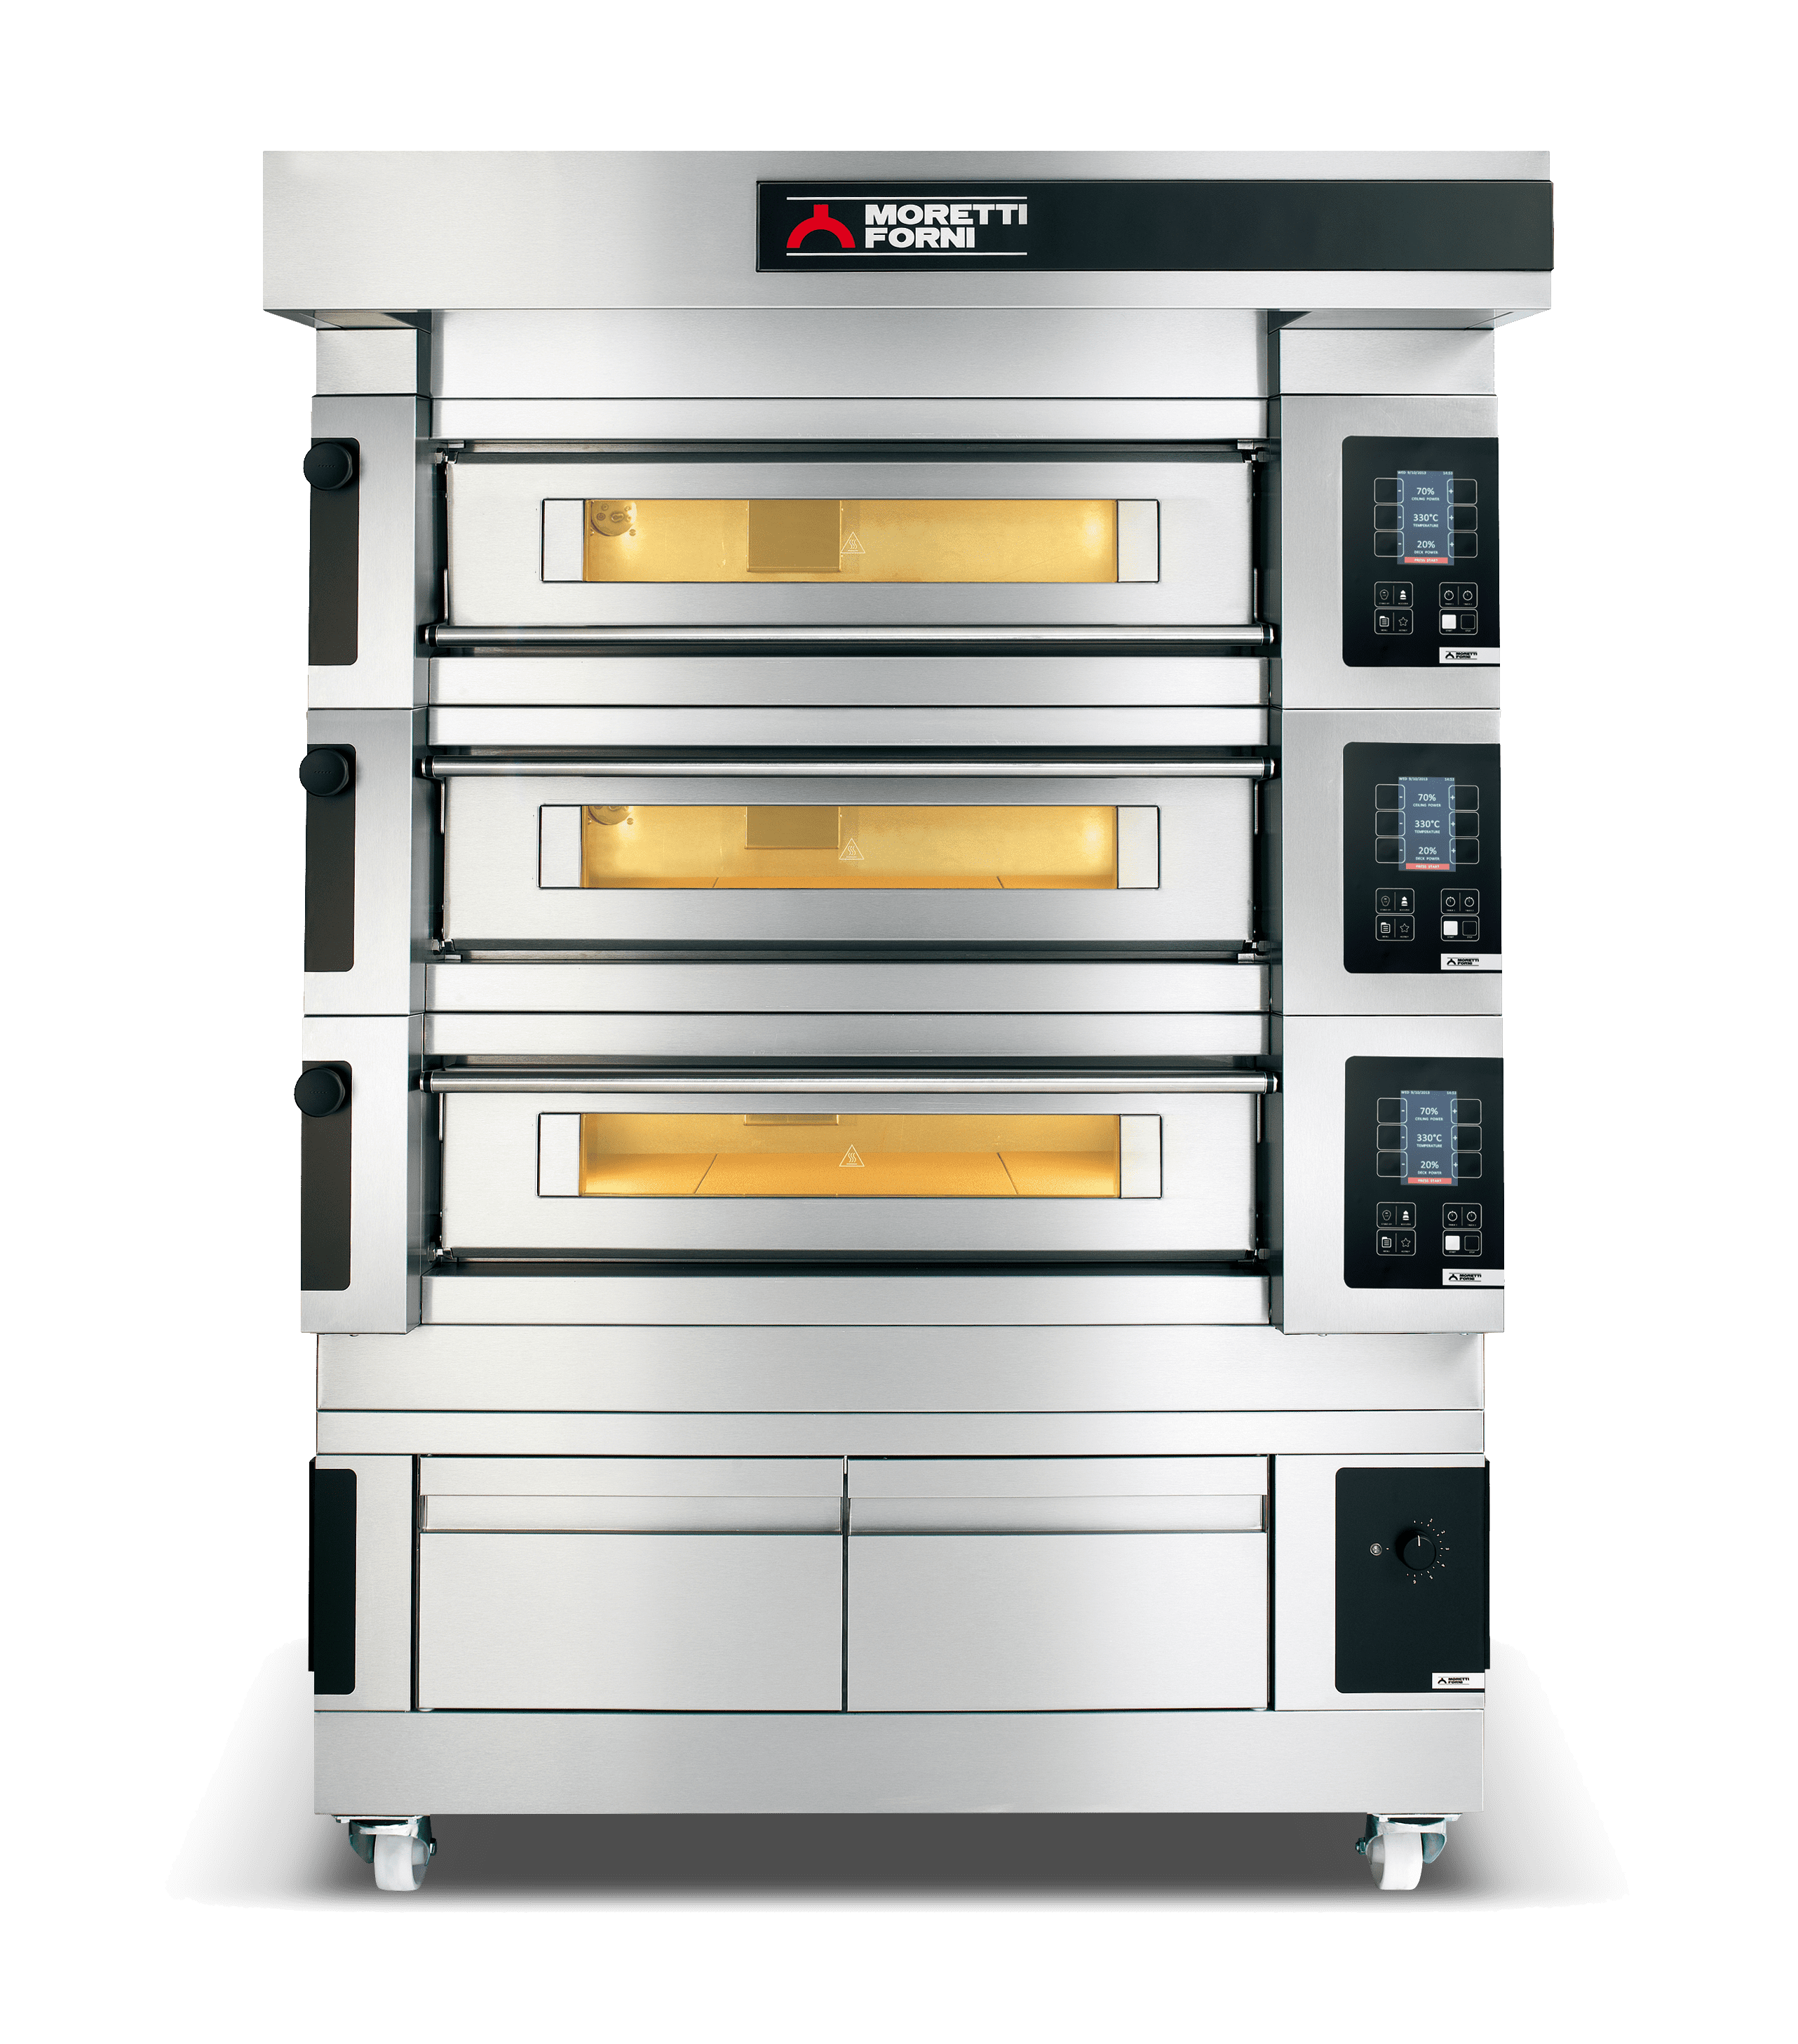 Serie S – Triple Deck Oven on Prover